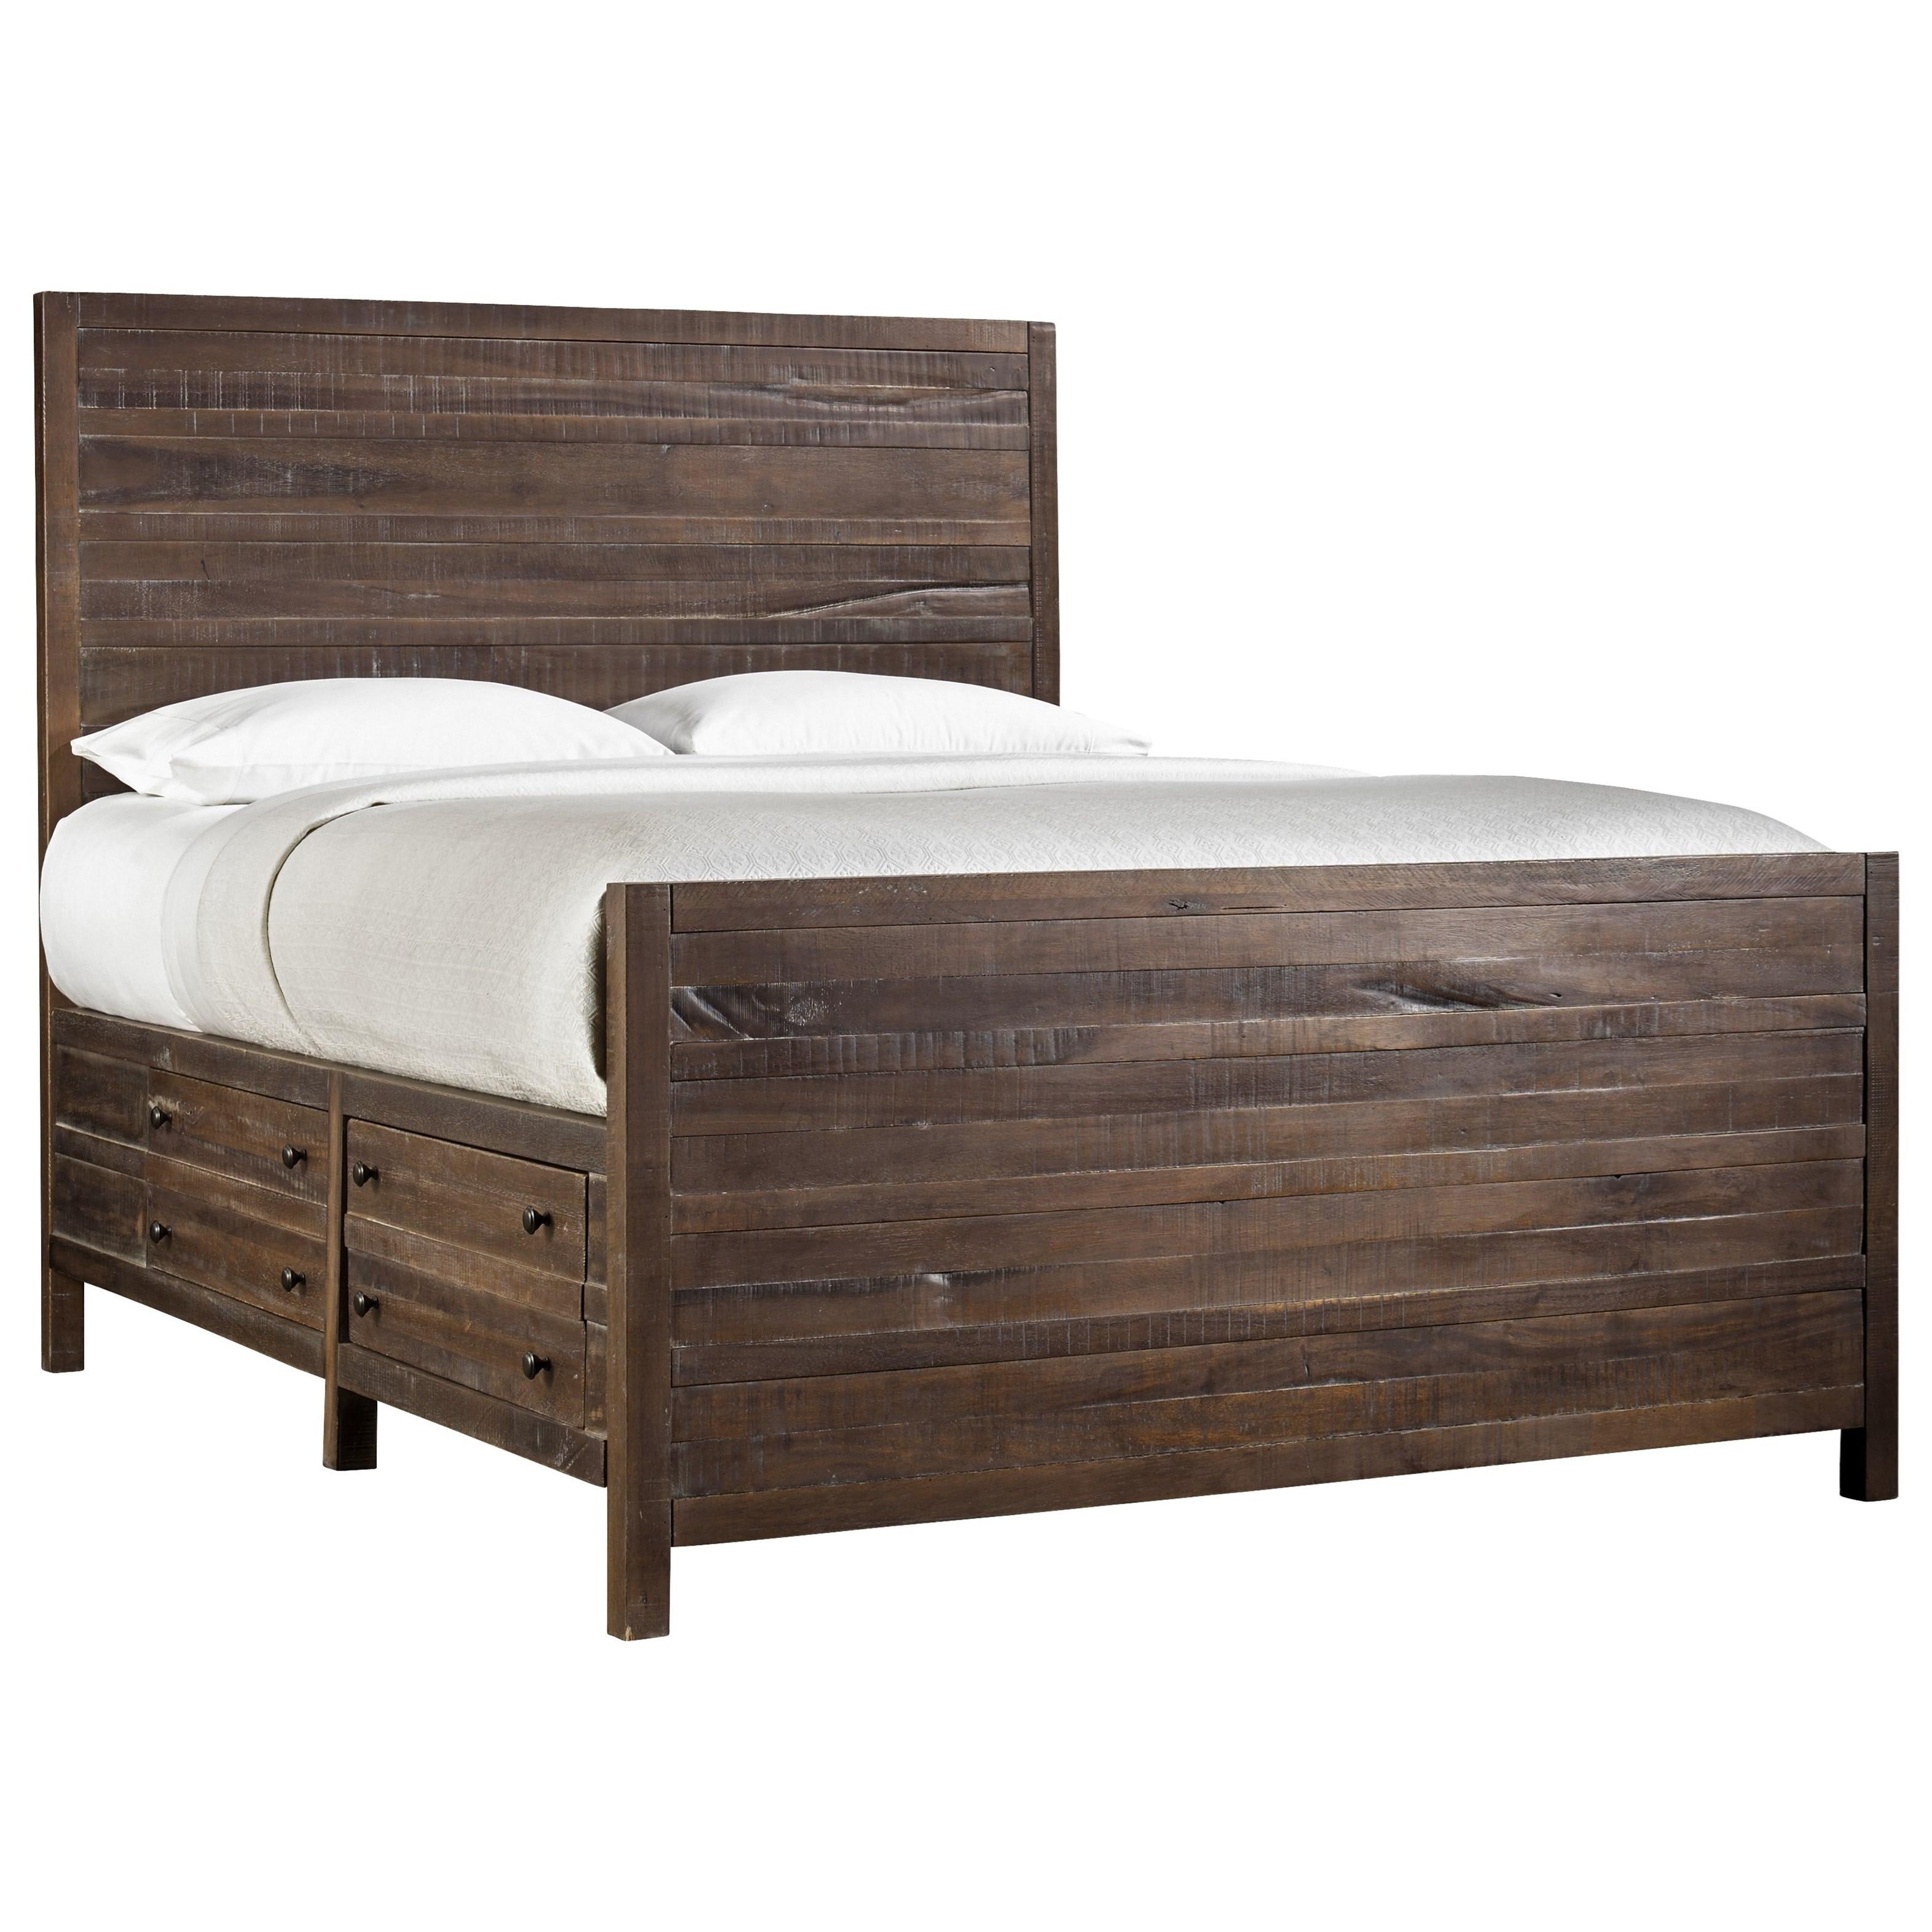 Contemporary Storage Bed TOWNSEND 8T06D7 in Java 